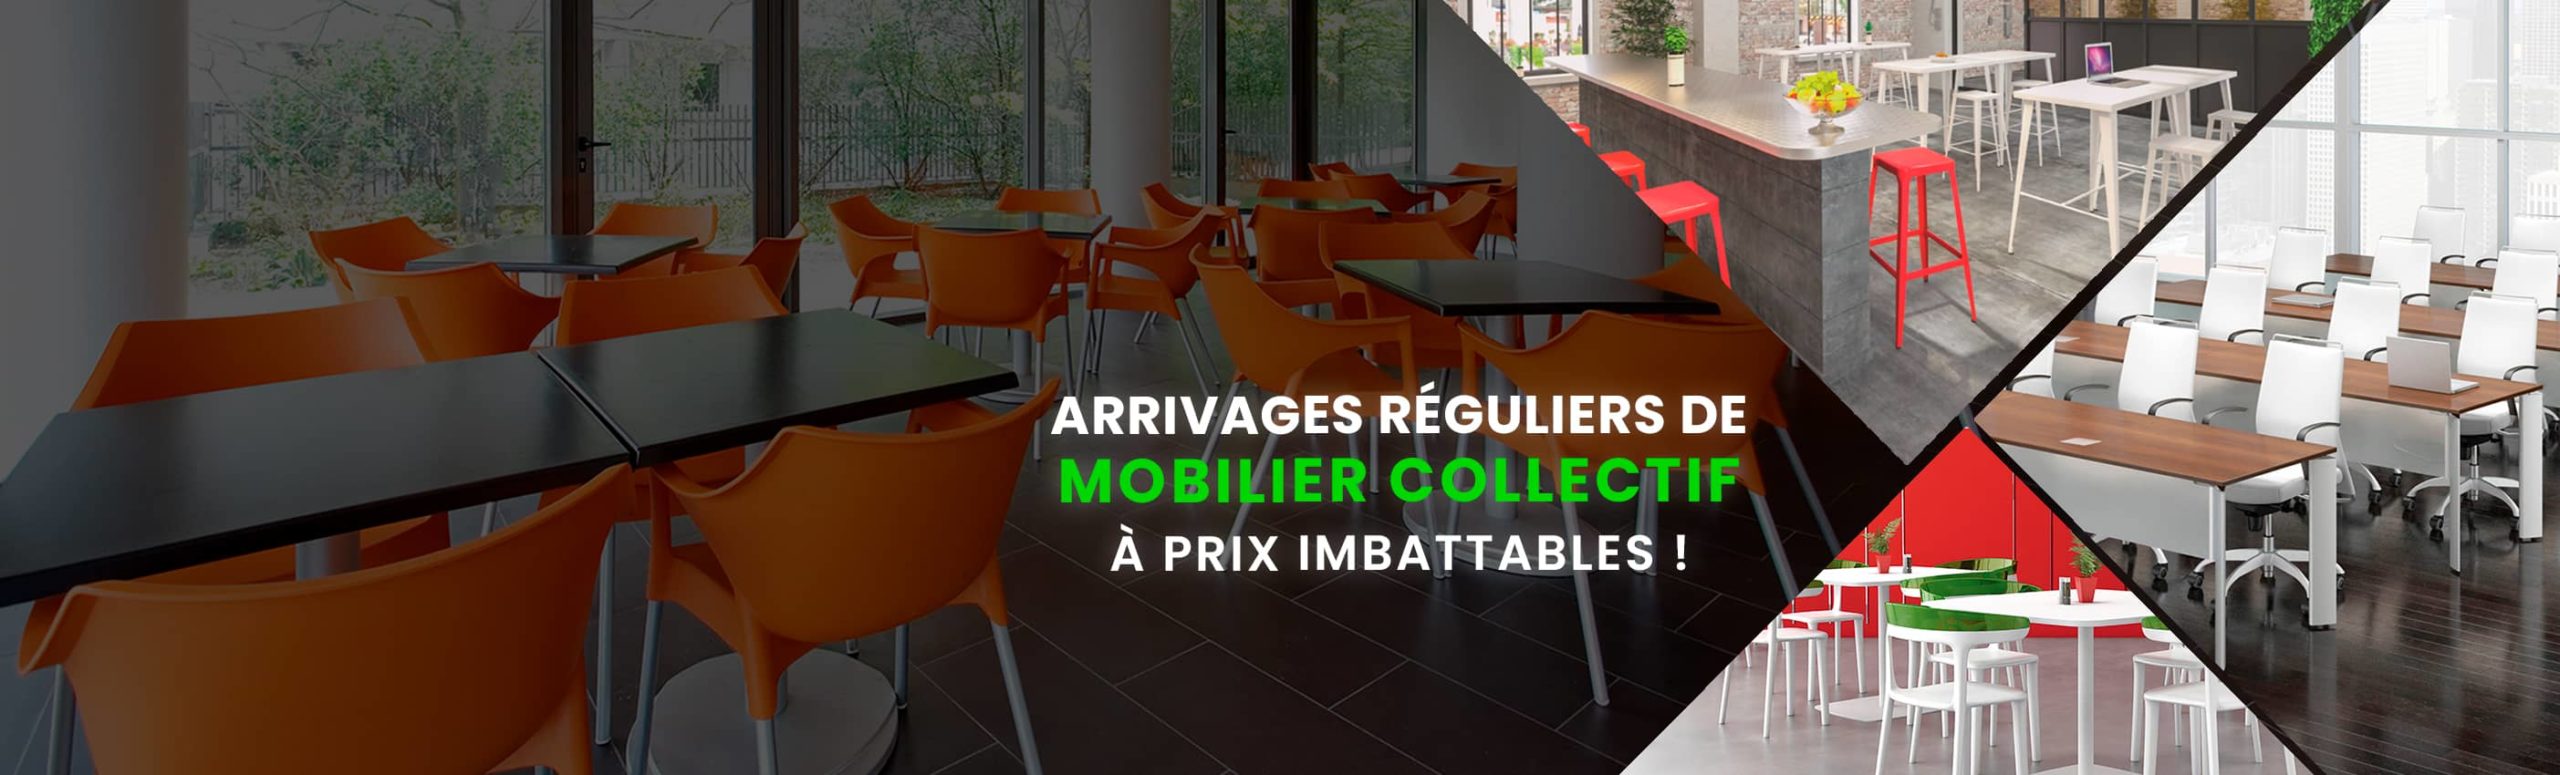 Mobilier collectif d'occasion